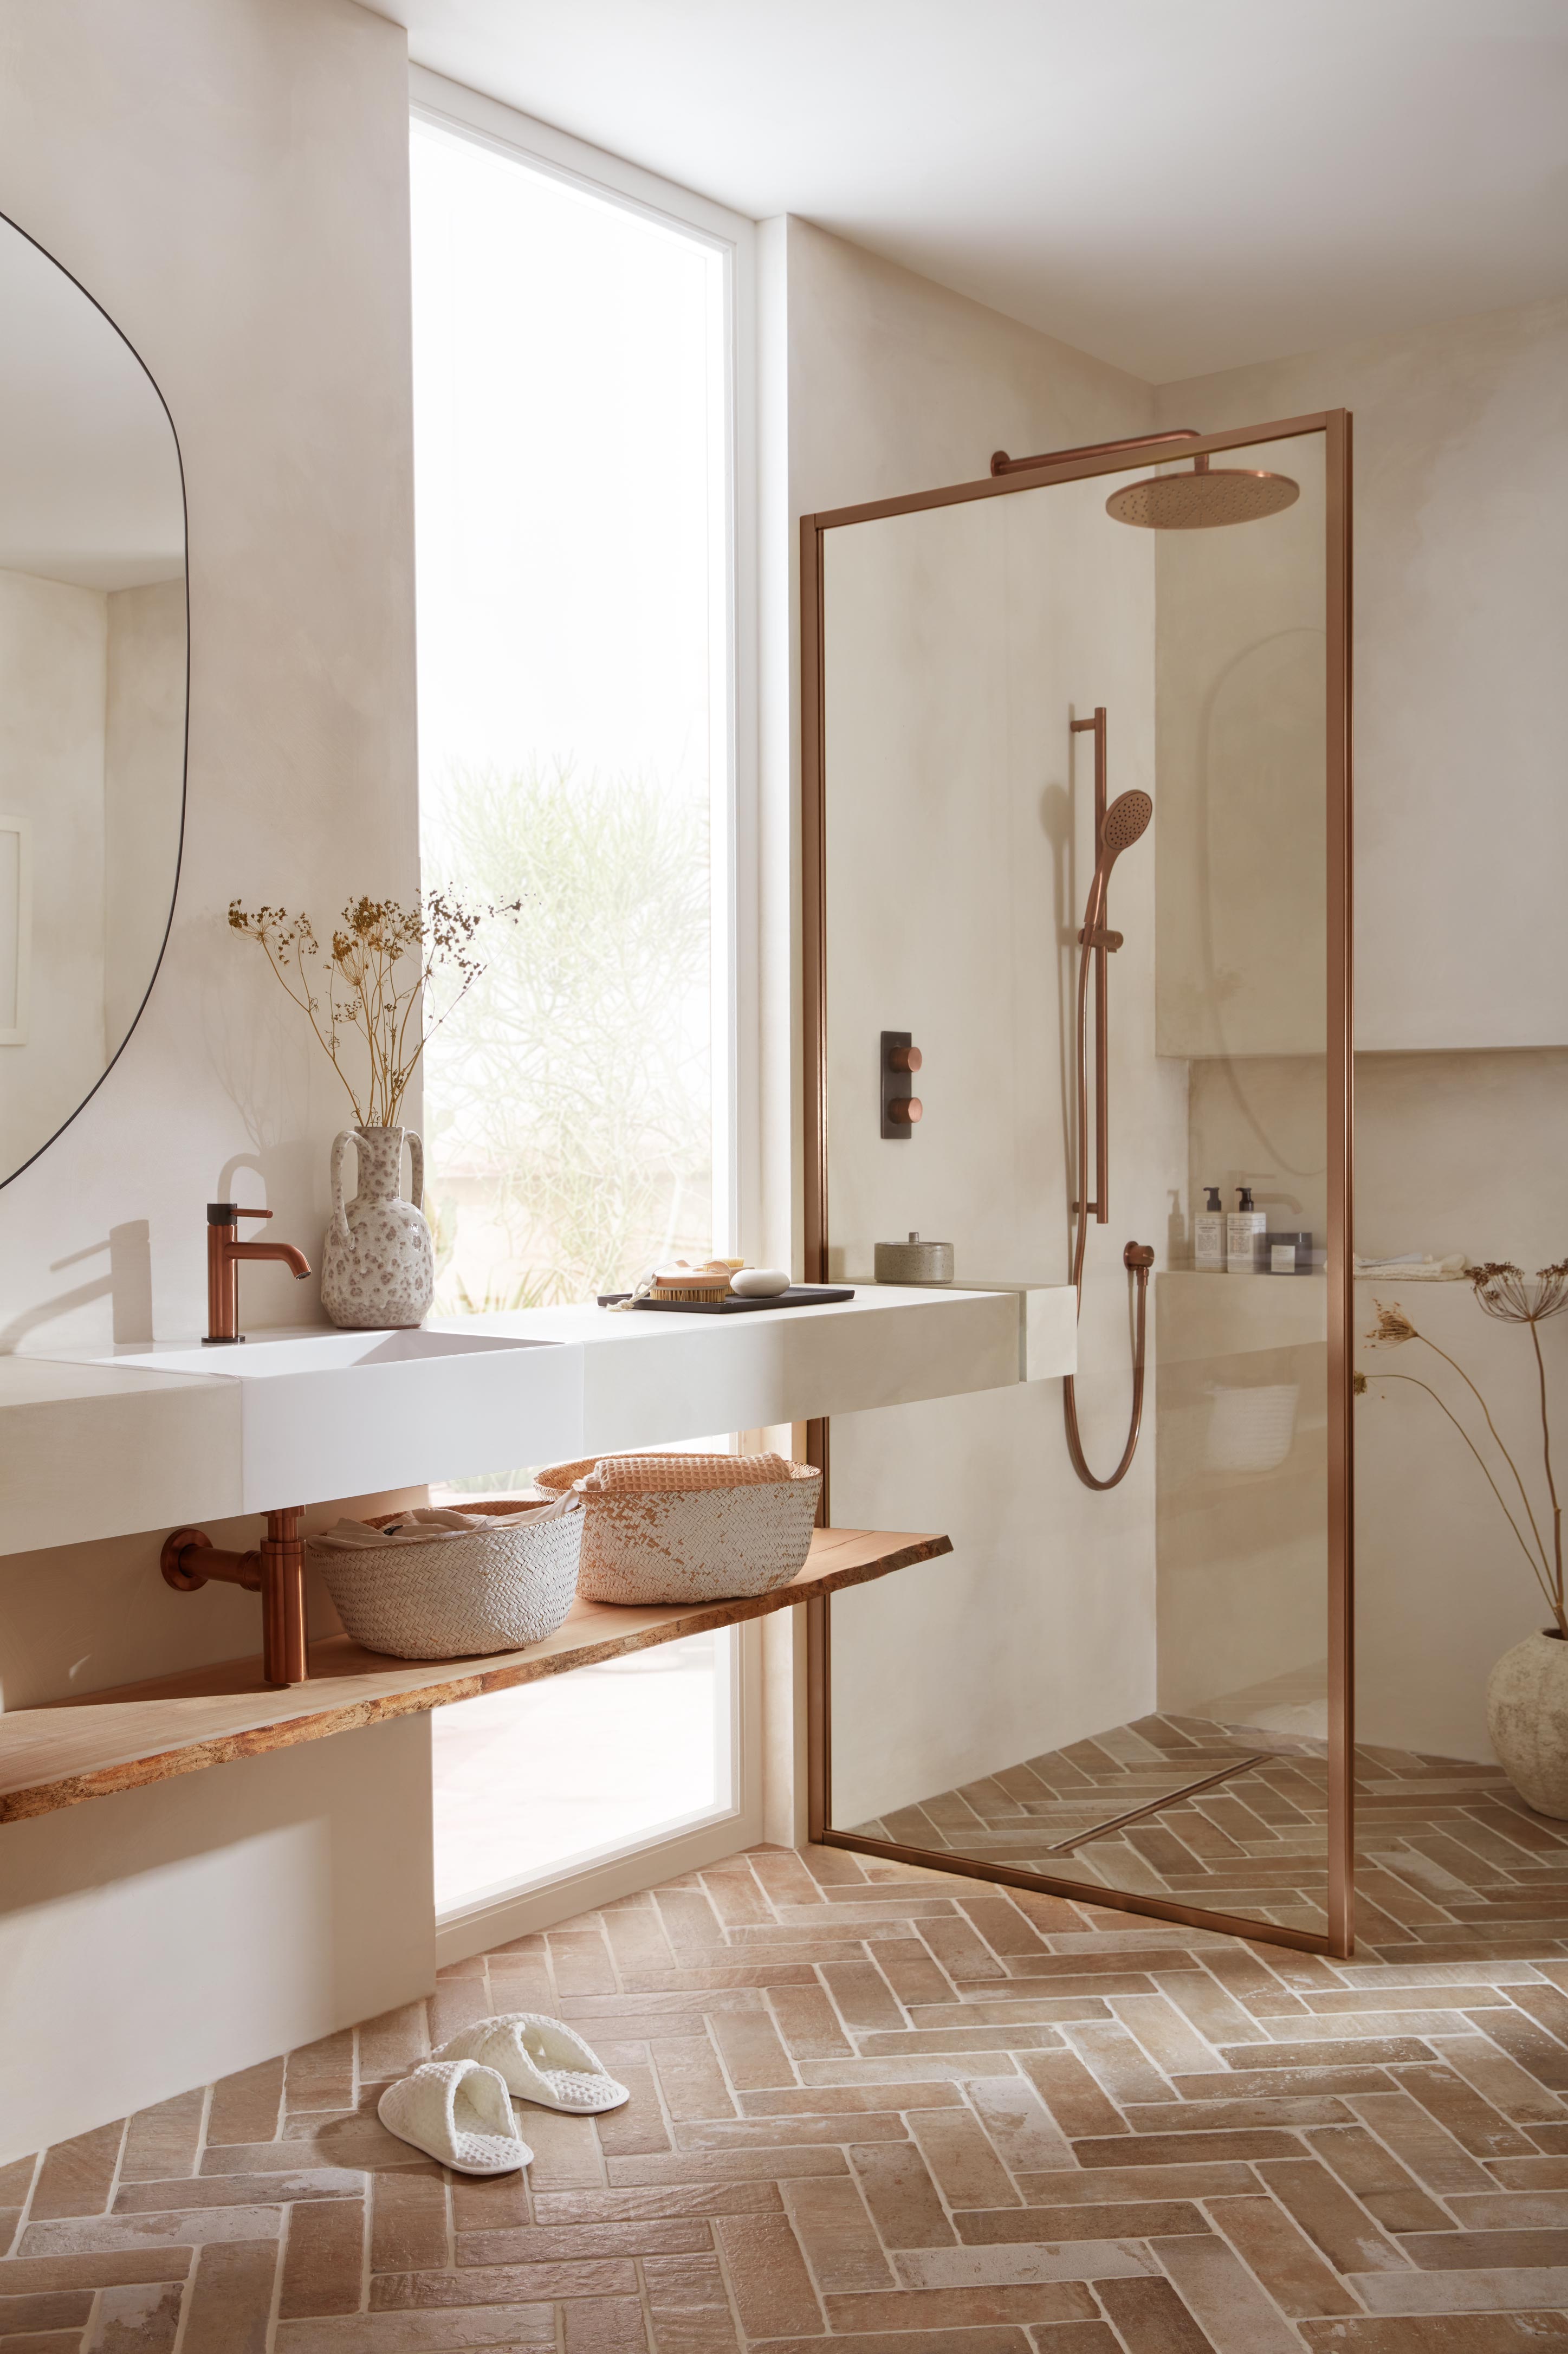 How to Balance Colors and Textures in the Bathroom